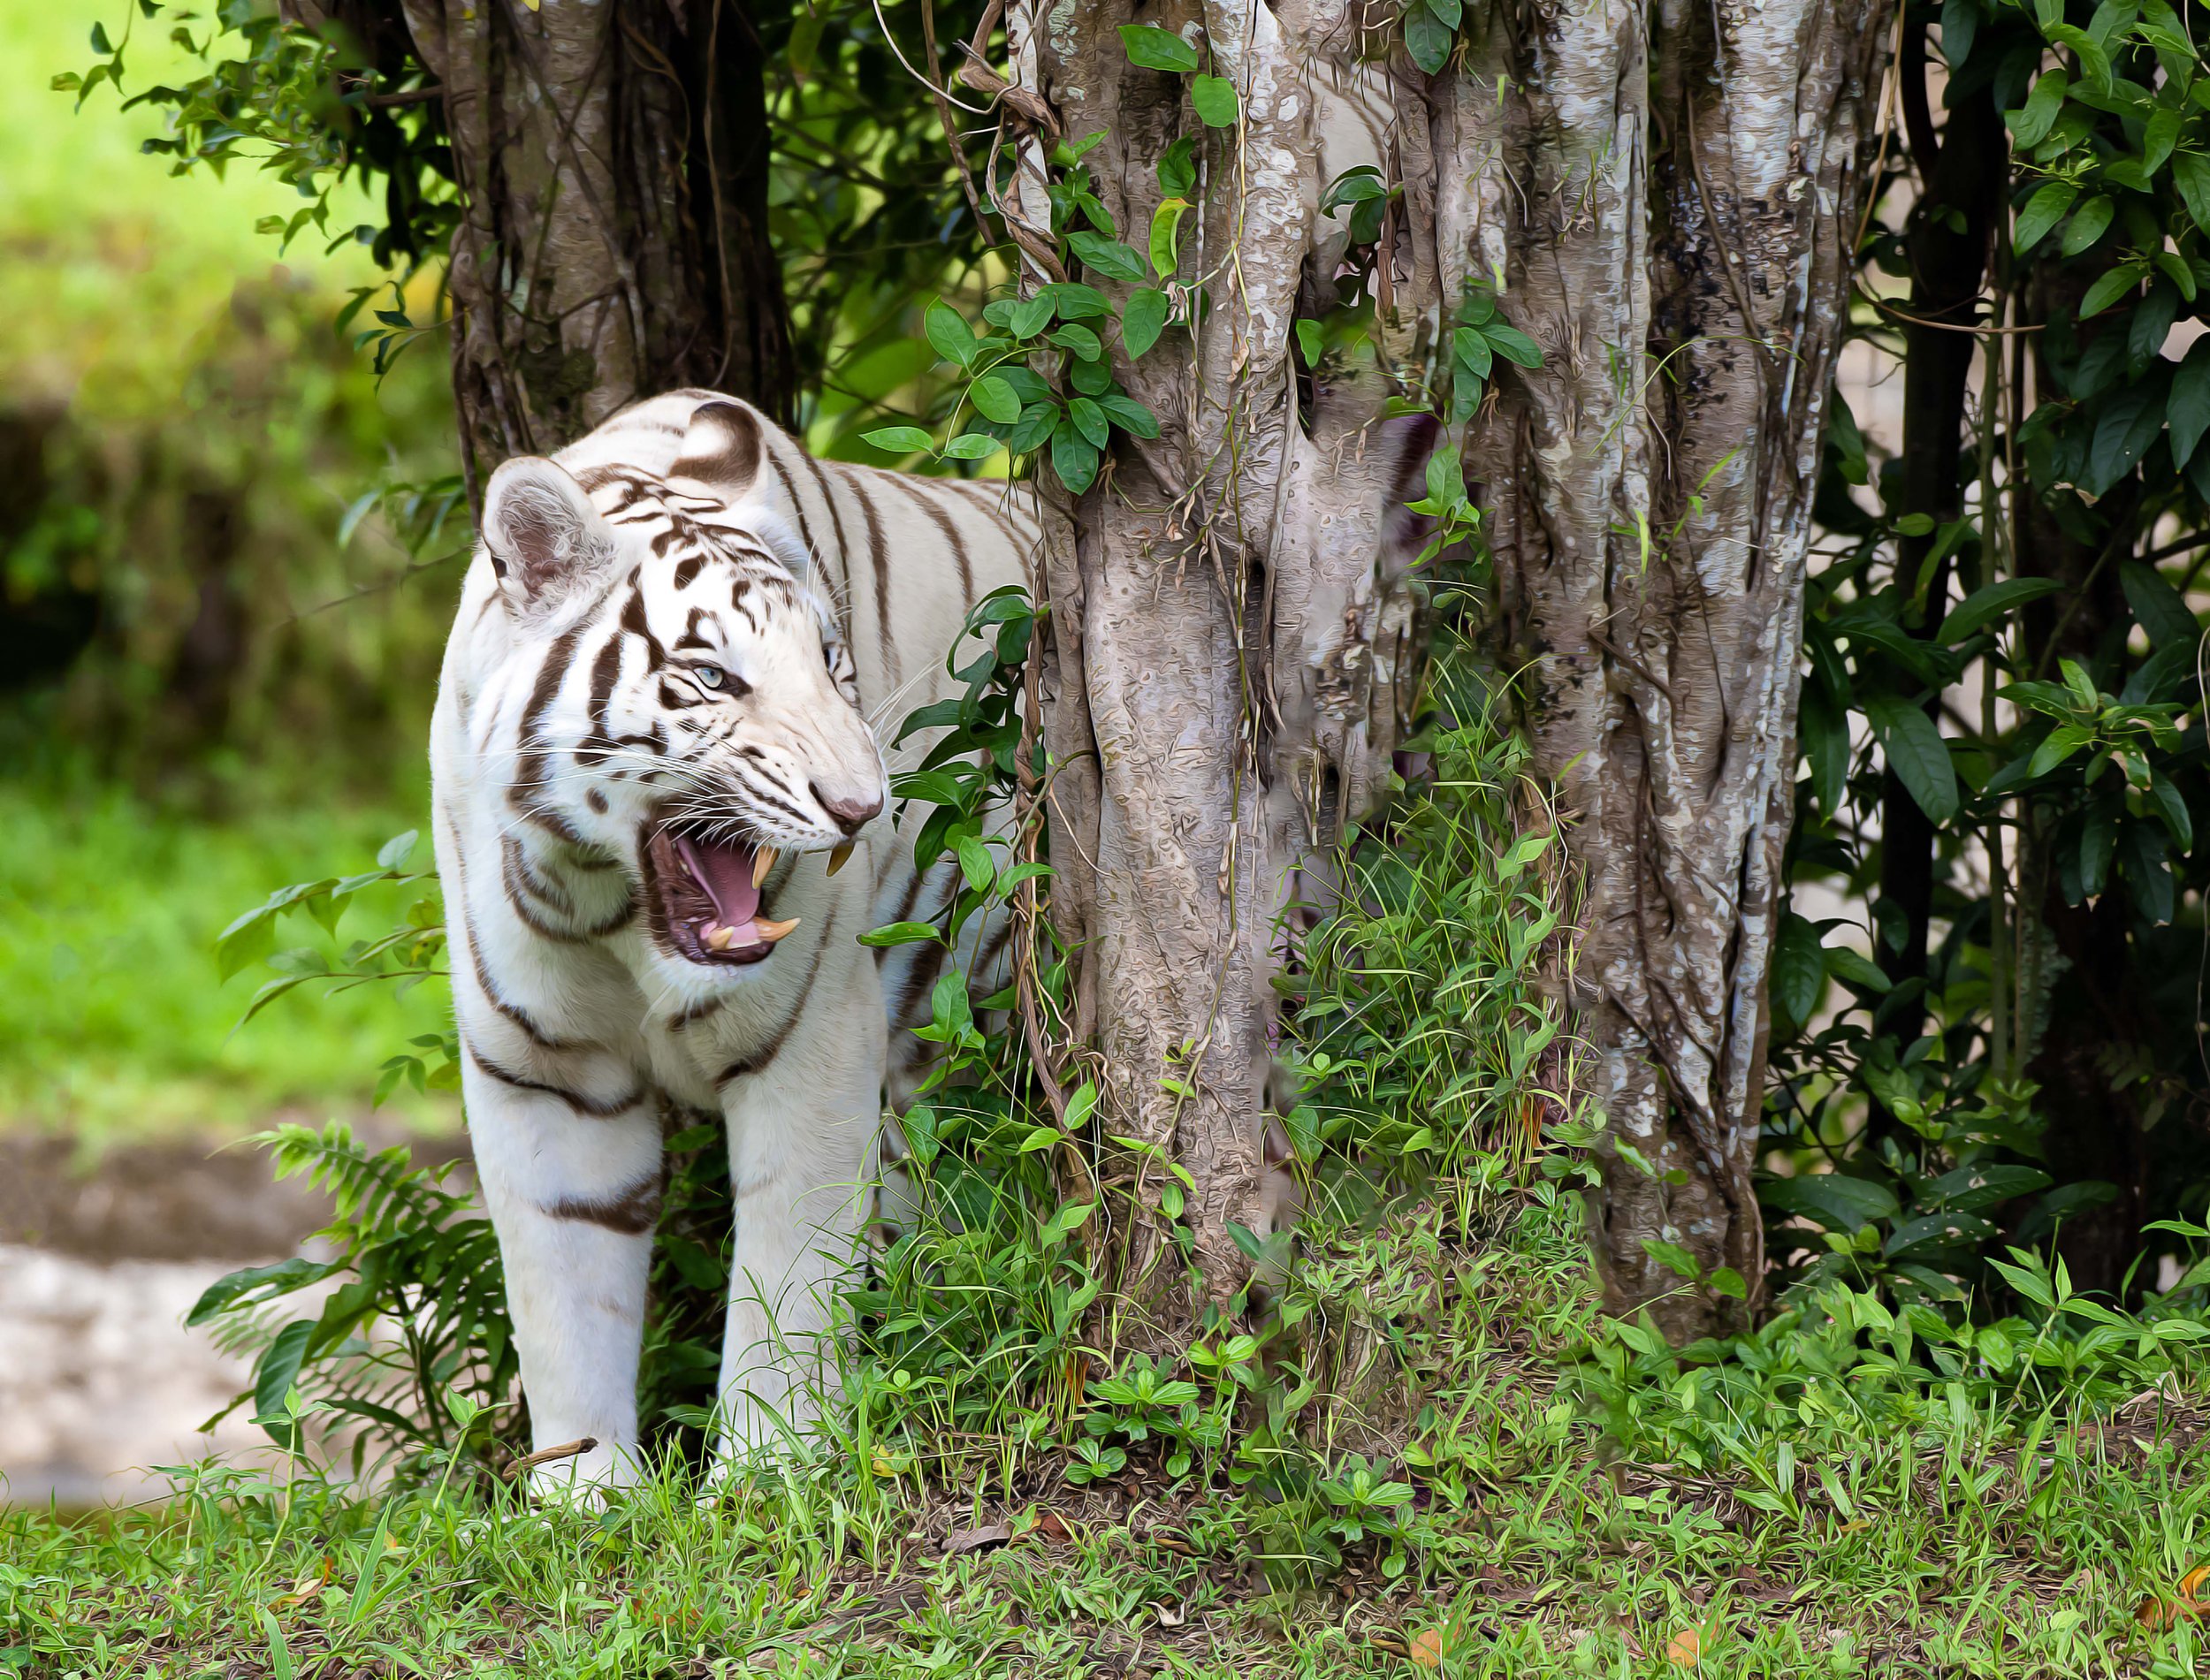 Hawaii 7-23 8 - White Tiger - Oil Painting without Filter.jpg